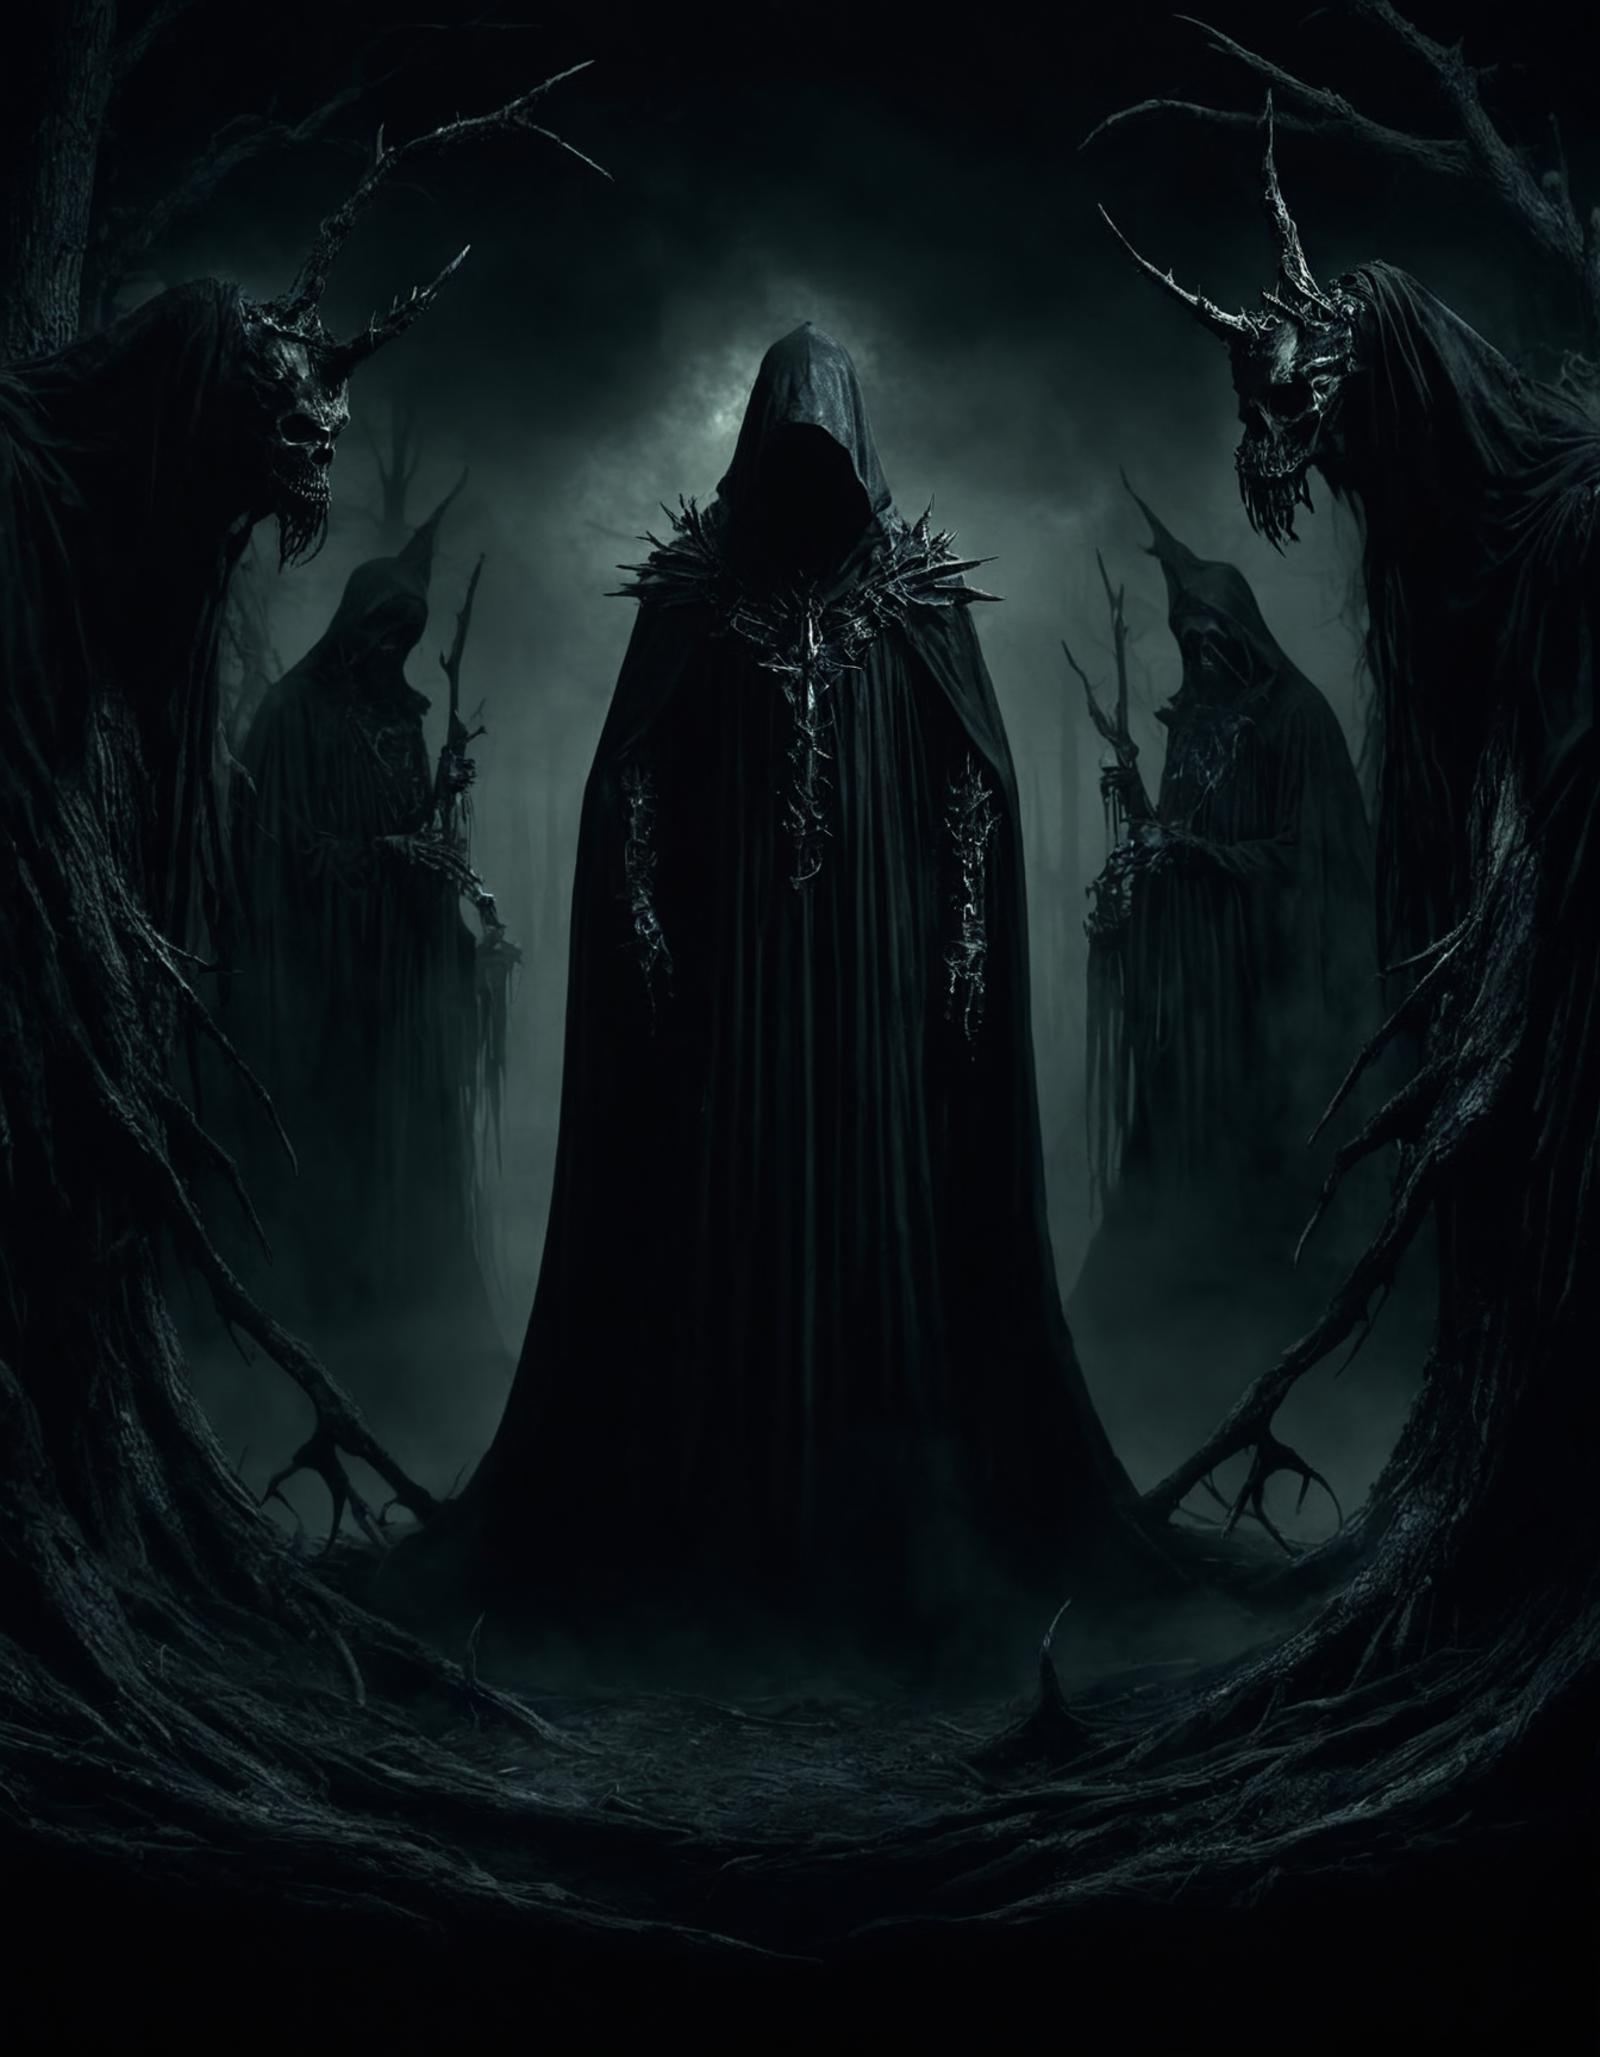 Dark Fantasy Artwork: A Demon King in a Black Robe with Horns and a Sword